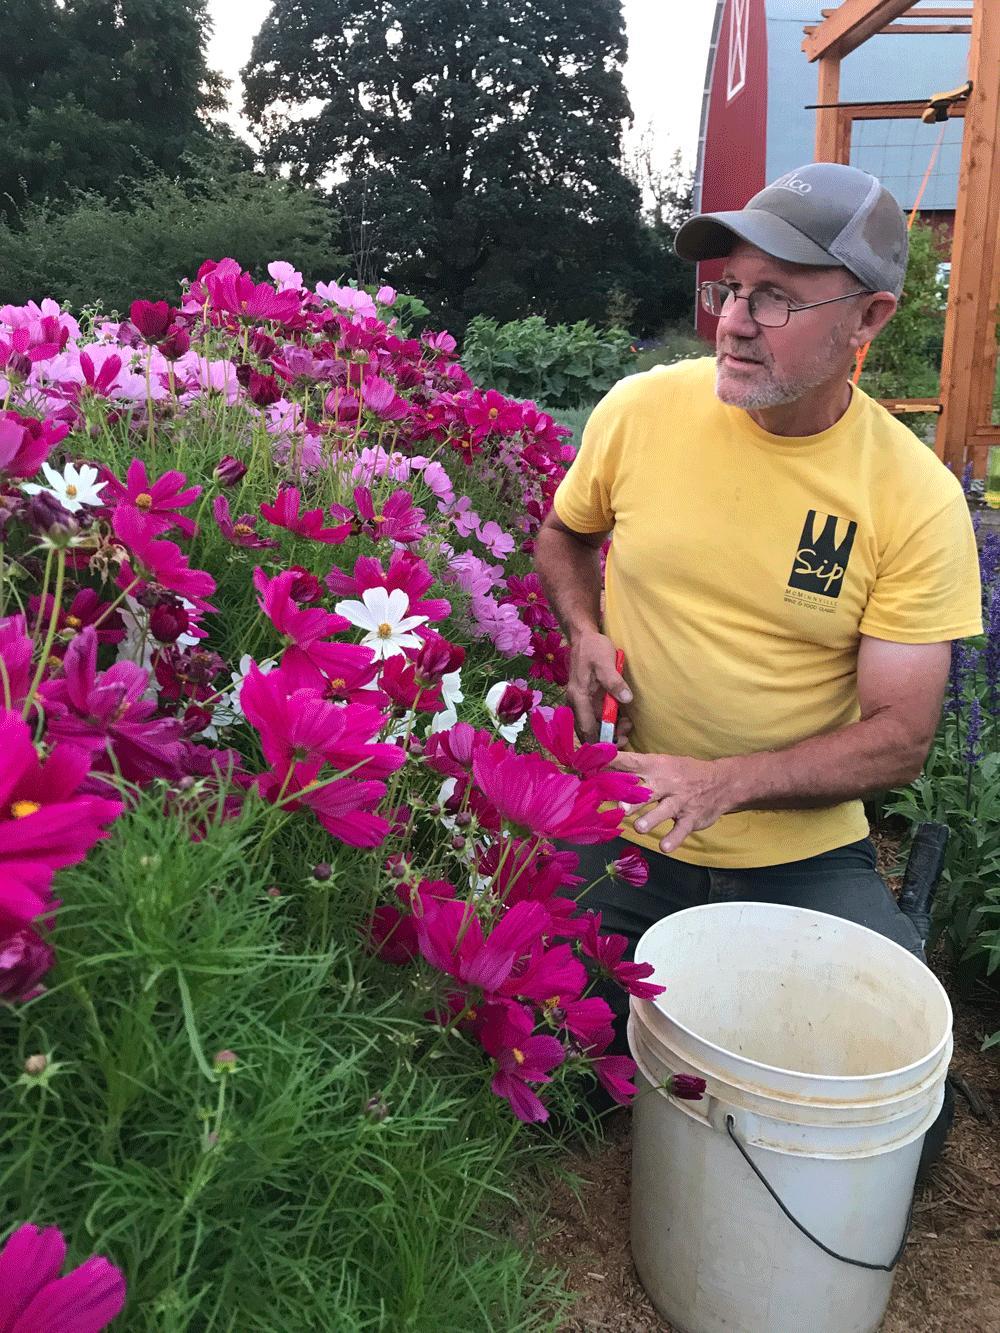 Michael O’Loughlin uses garden shears to remove faded or dead flowers from pollinator plants growing on the family far